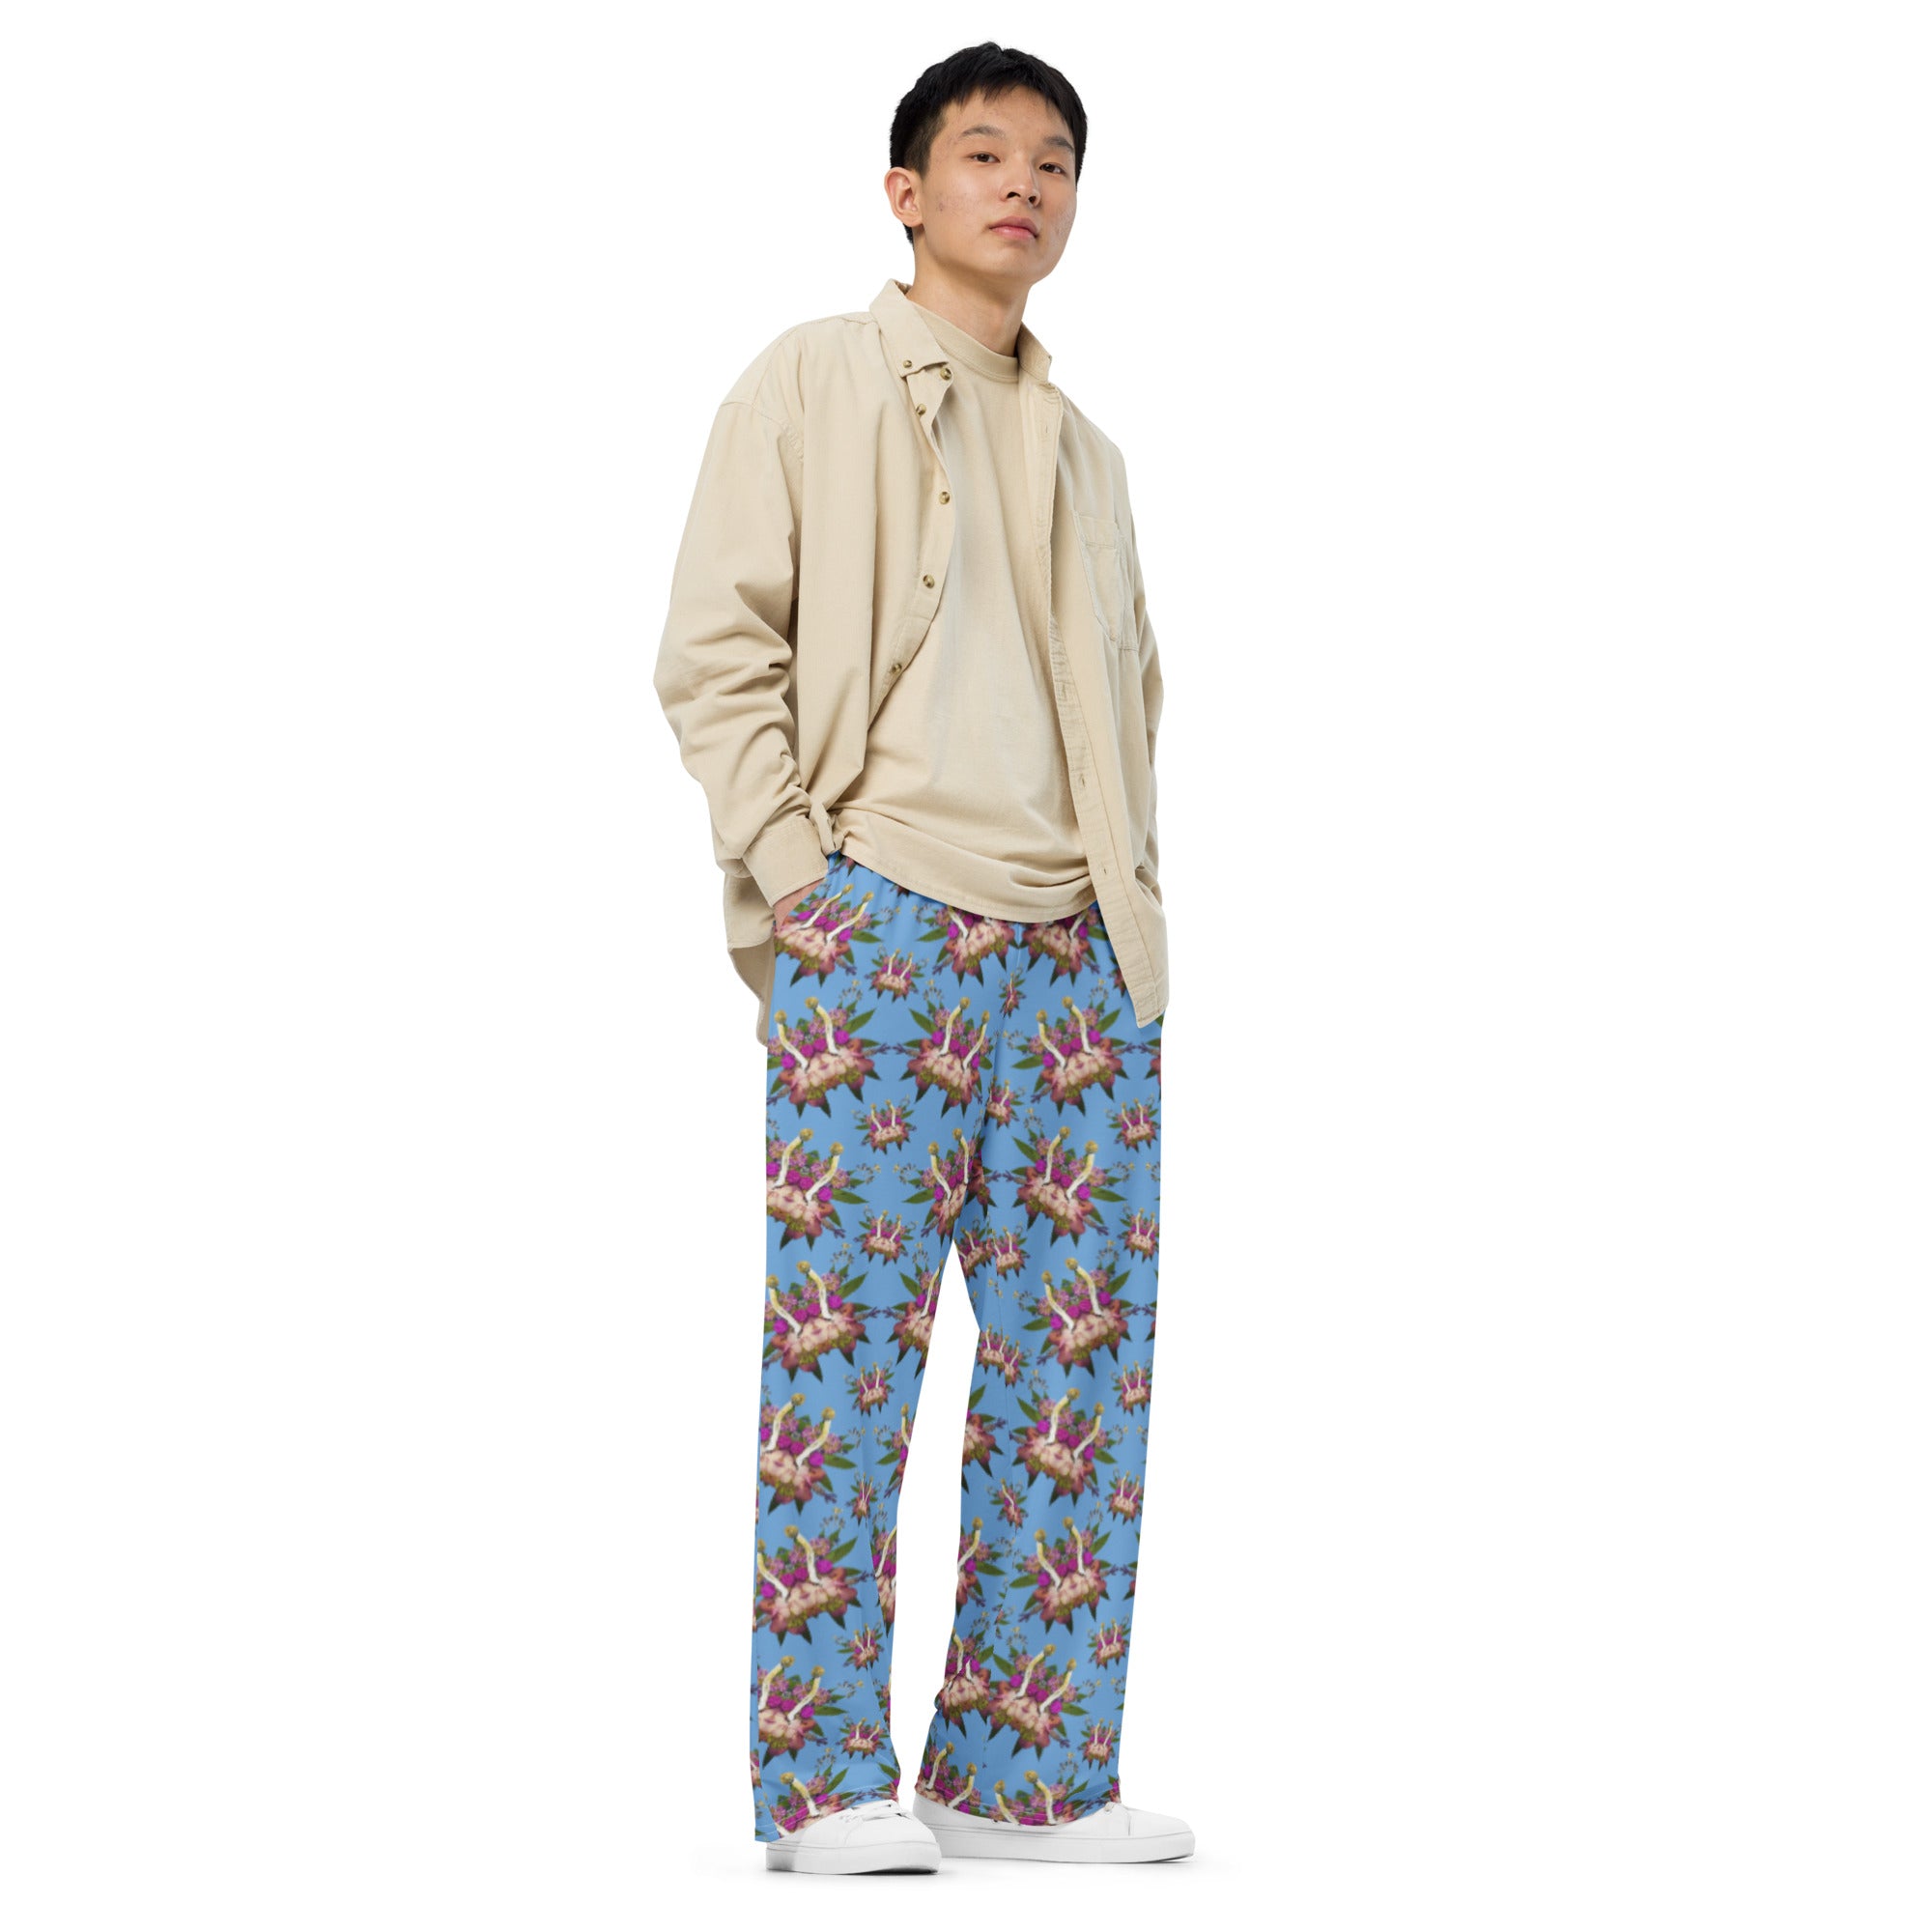 Fungeyes Playful (Sky) All-over print unisex wide-leg pants